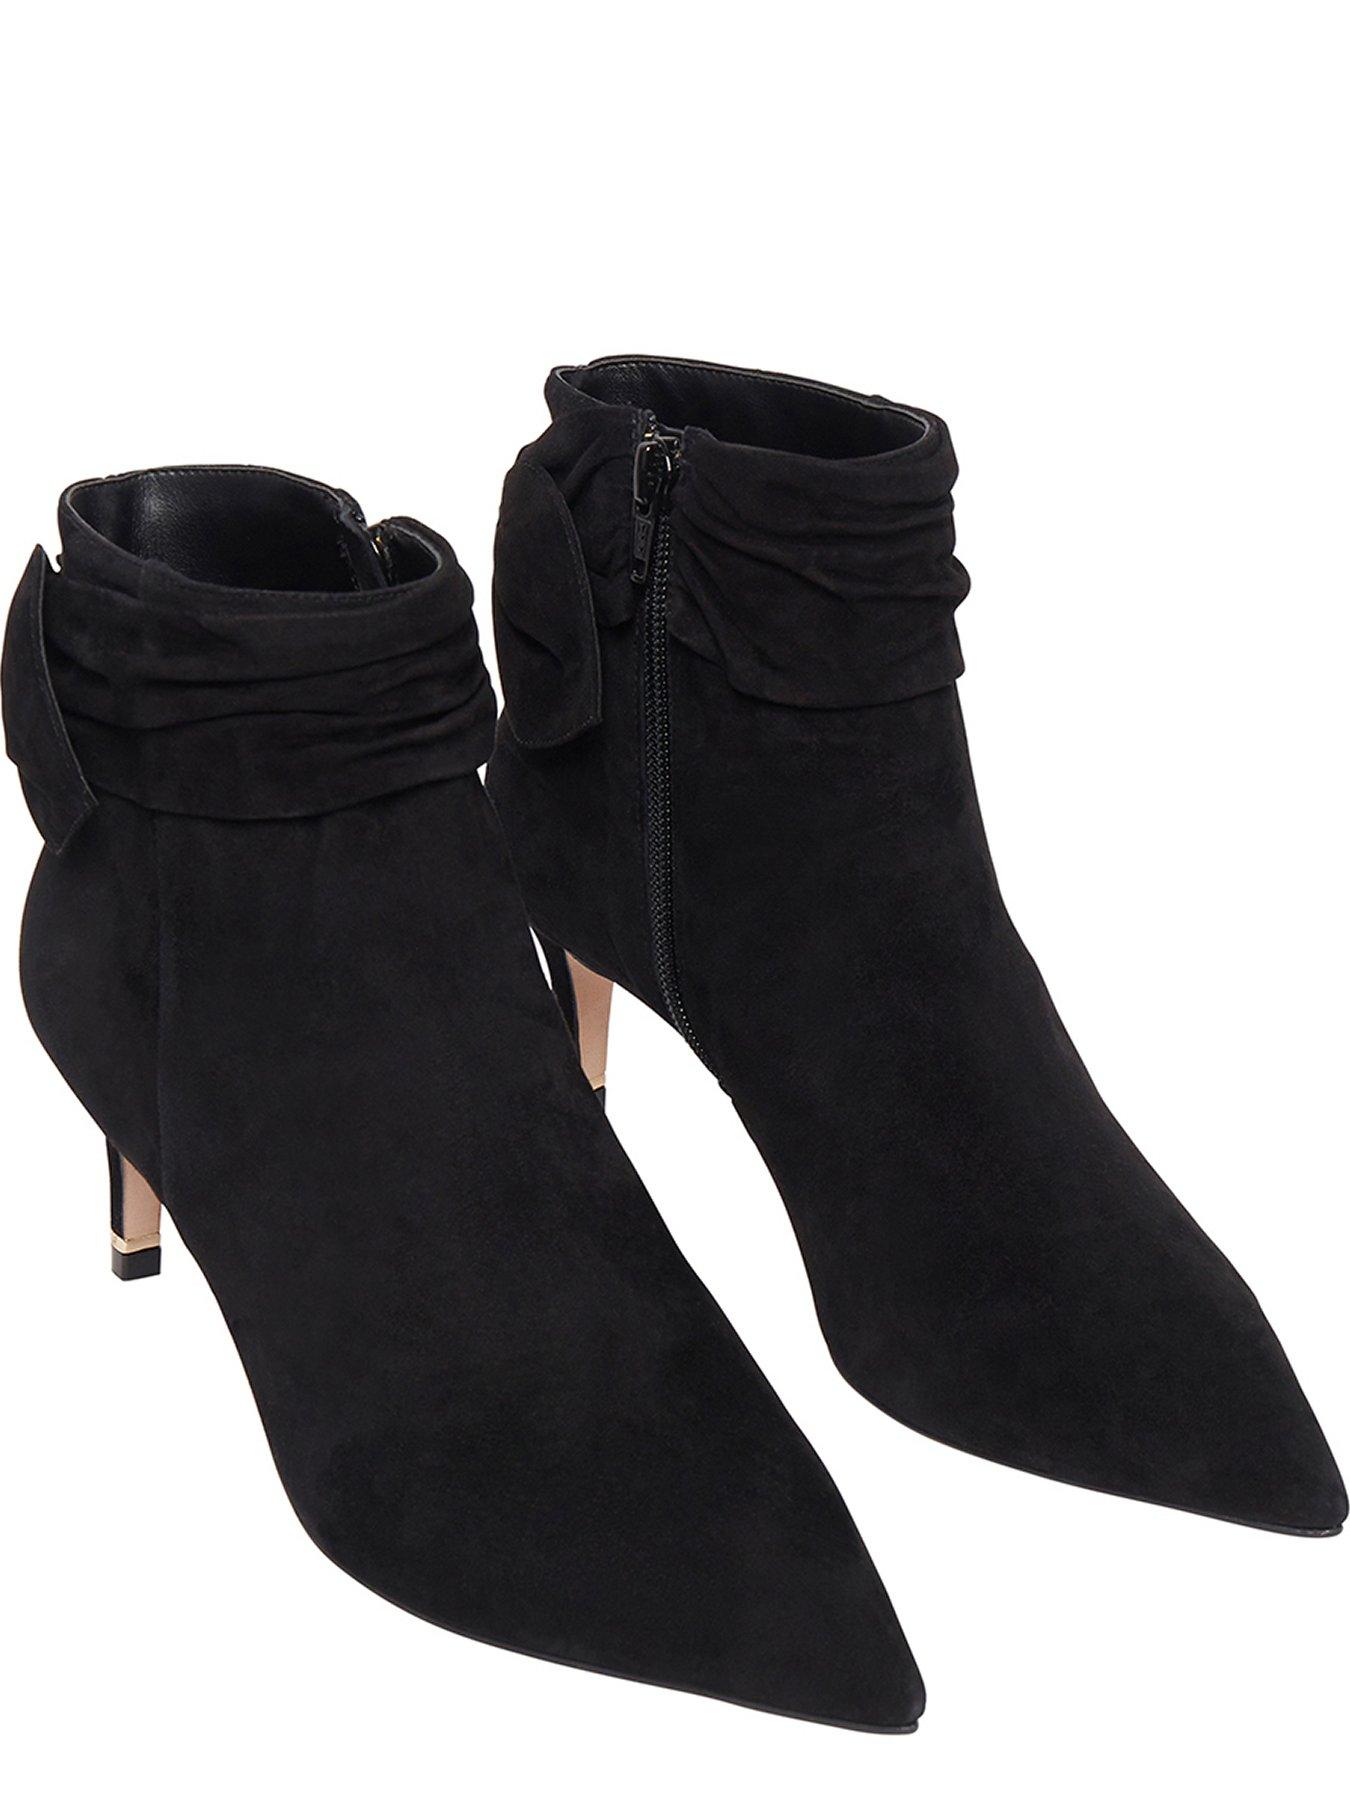 Ted Baker Yona Suede Bow Detail Ankle Boot - Black | very.co.uk